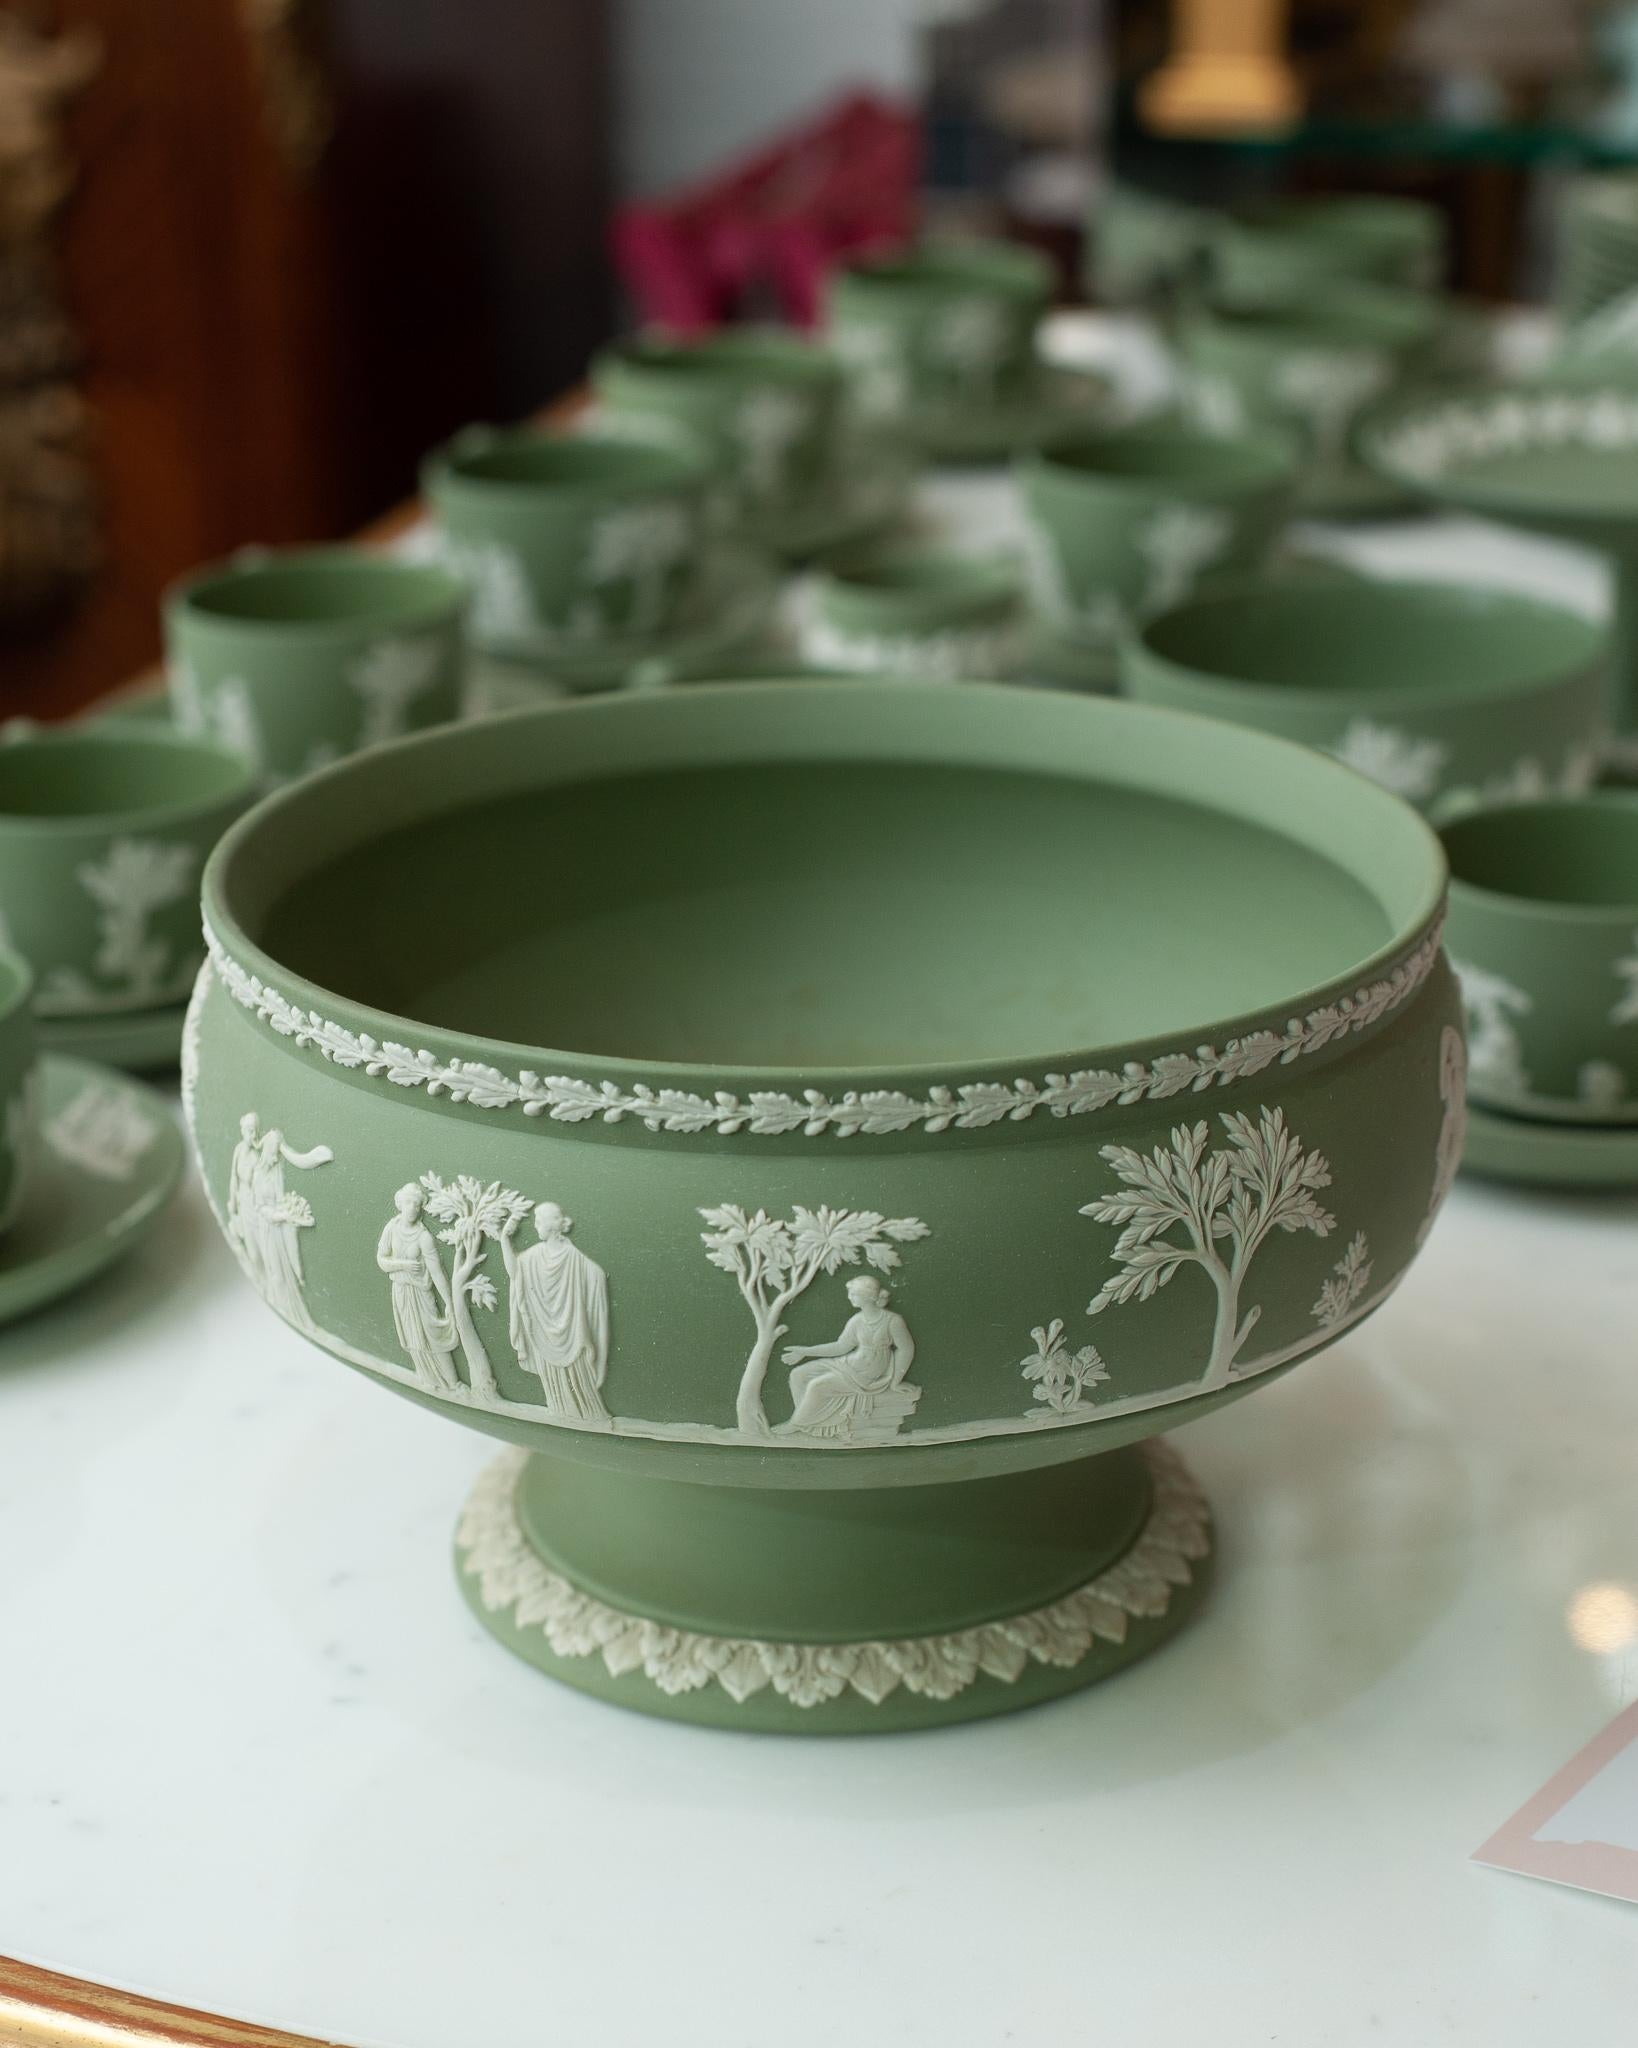 A stunning large antique Wedgwood sage green jasperware footed bowl with white overlay.